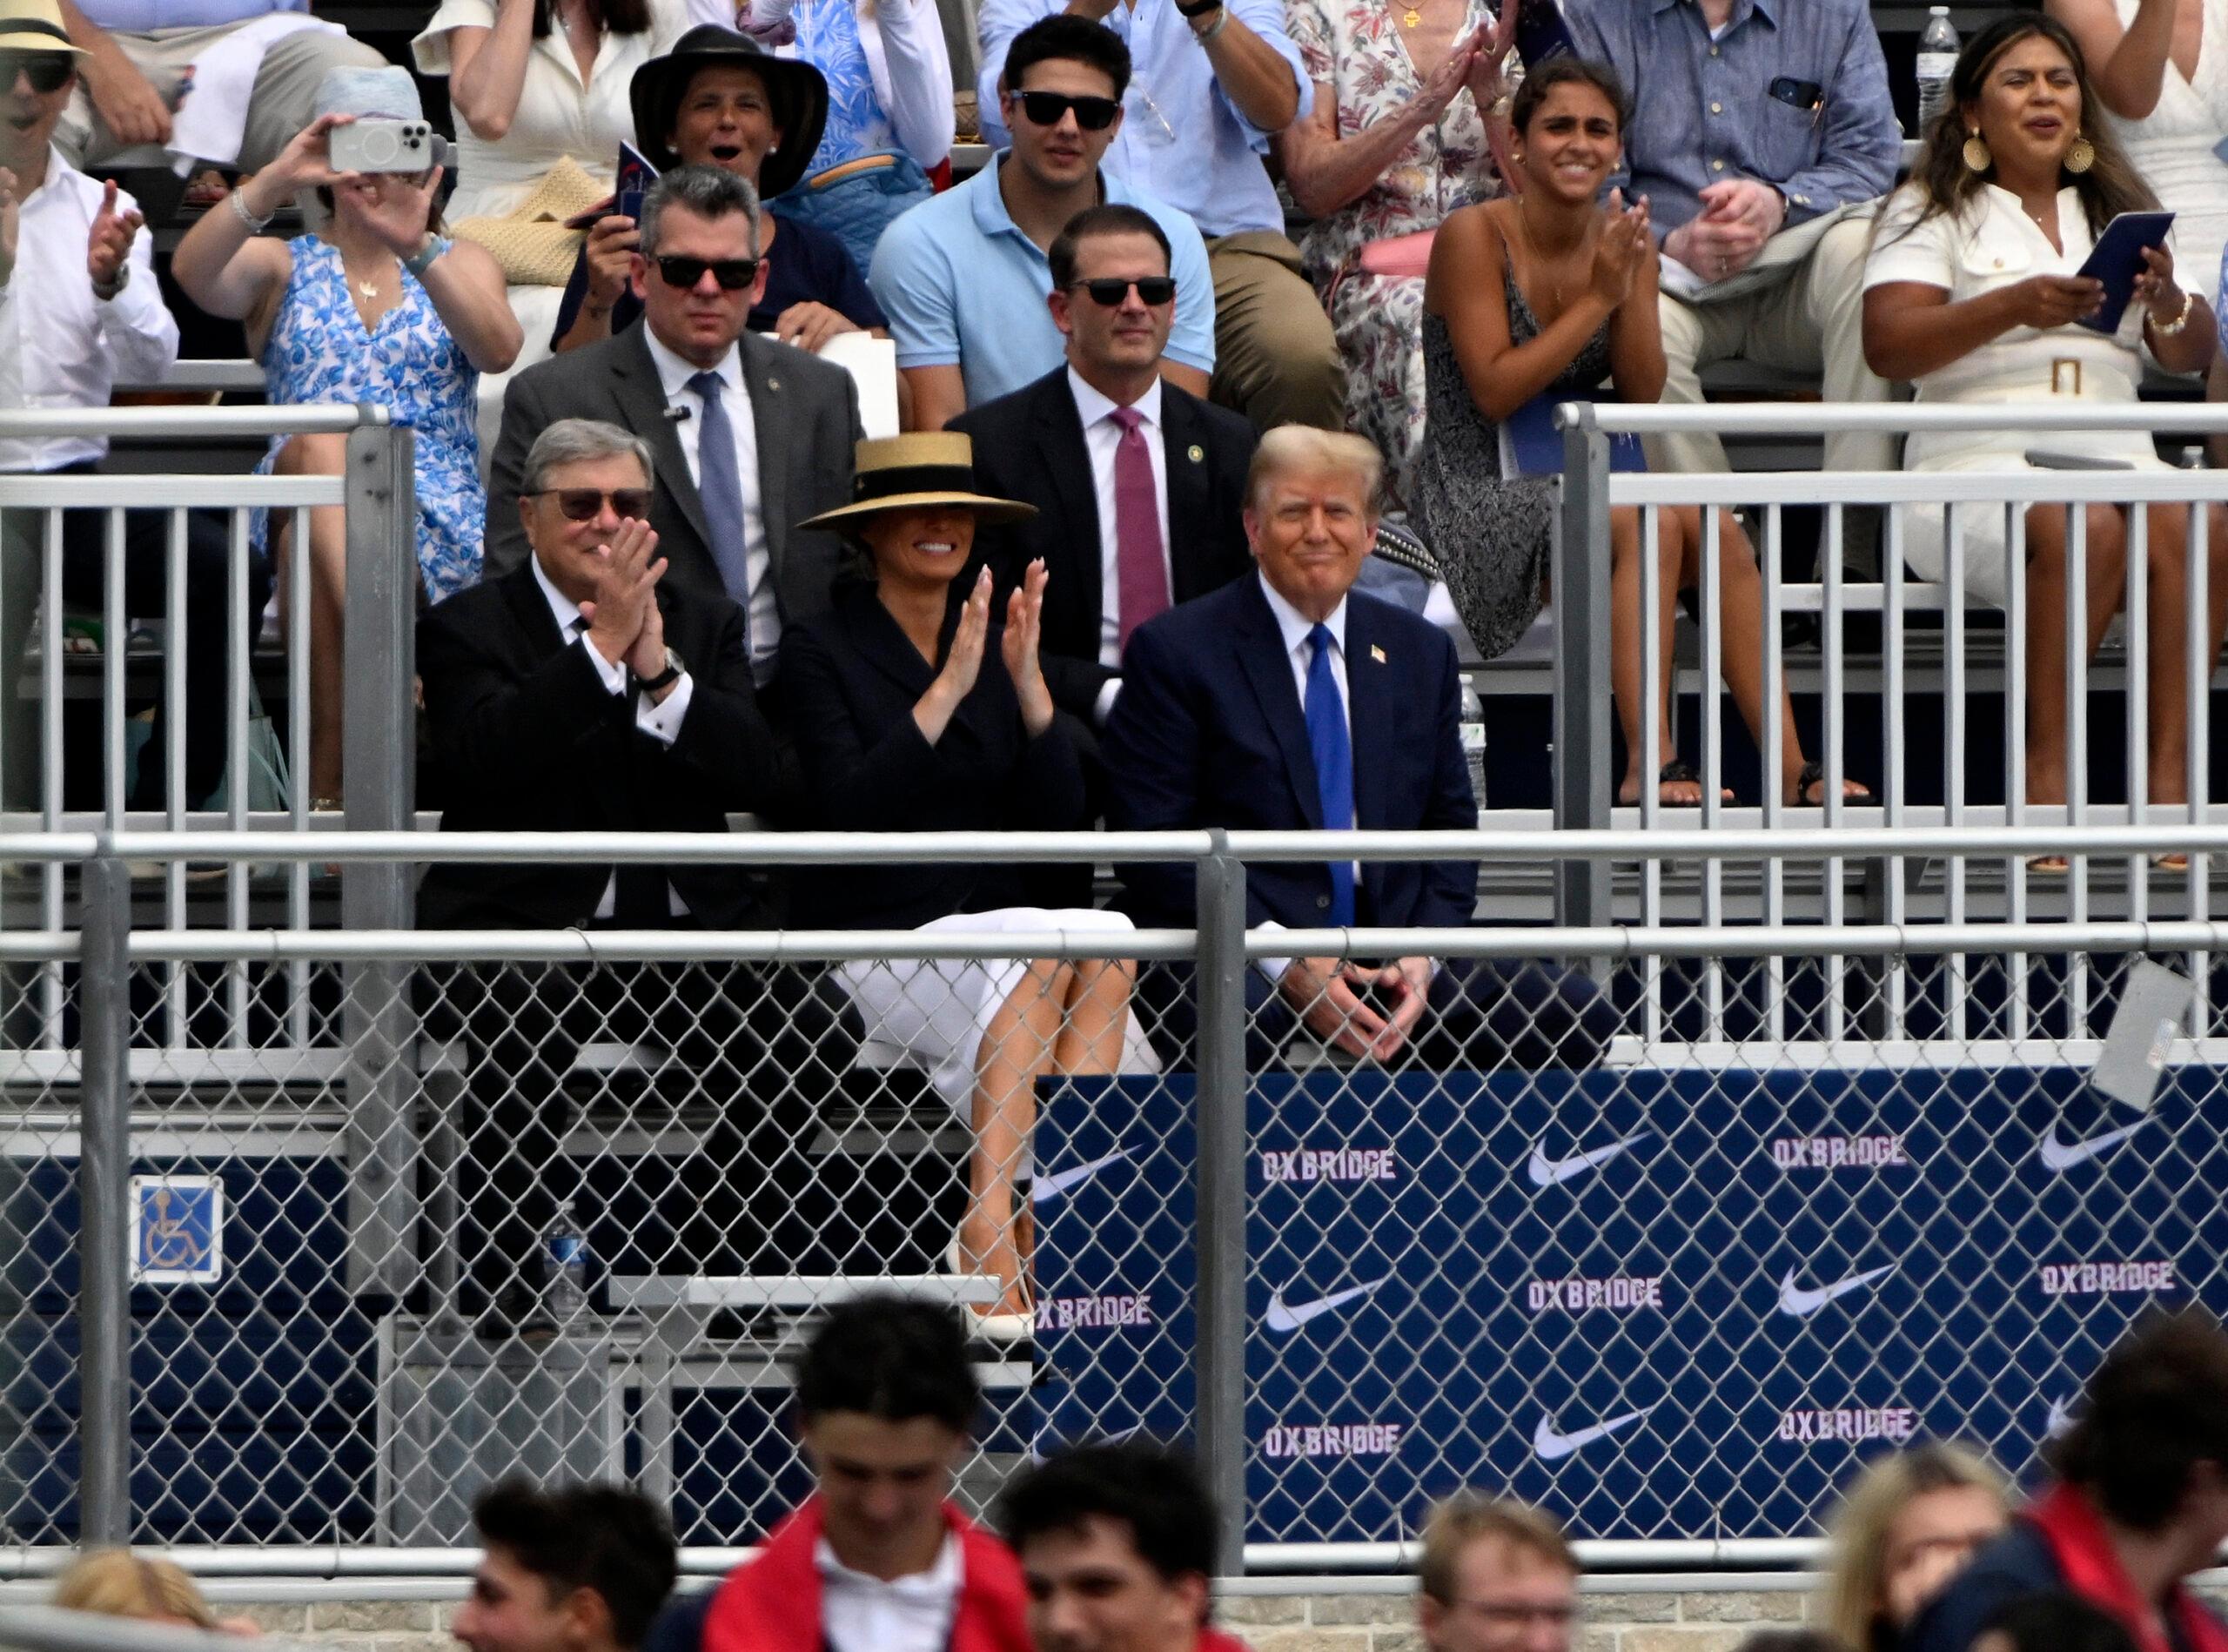 Barron Trump graduates from Oxbridge Academy with parents Donald Trump and Melania Trump watching in West Palm Beach, Florida.